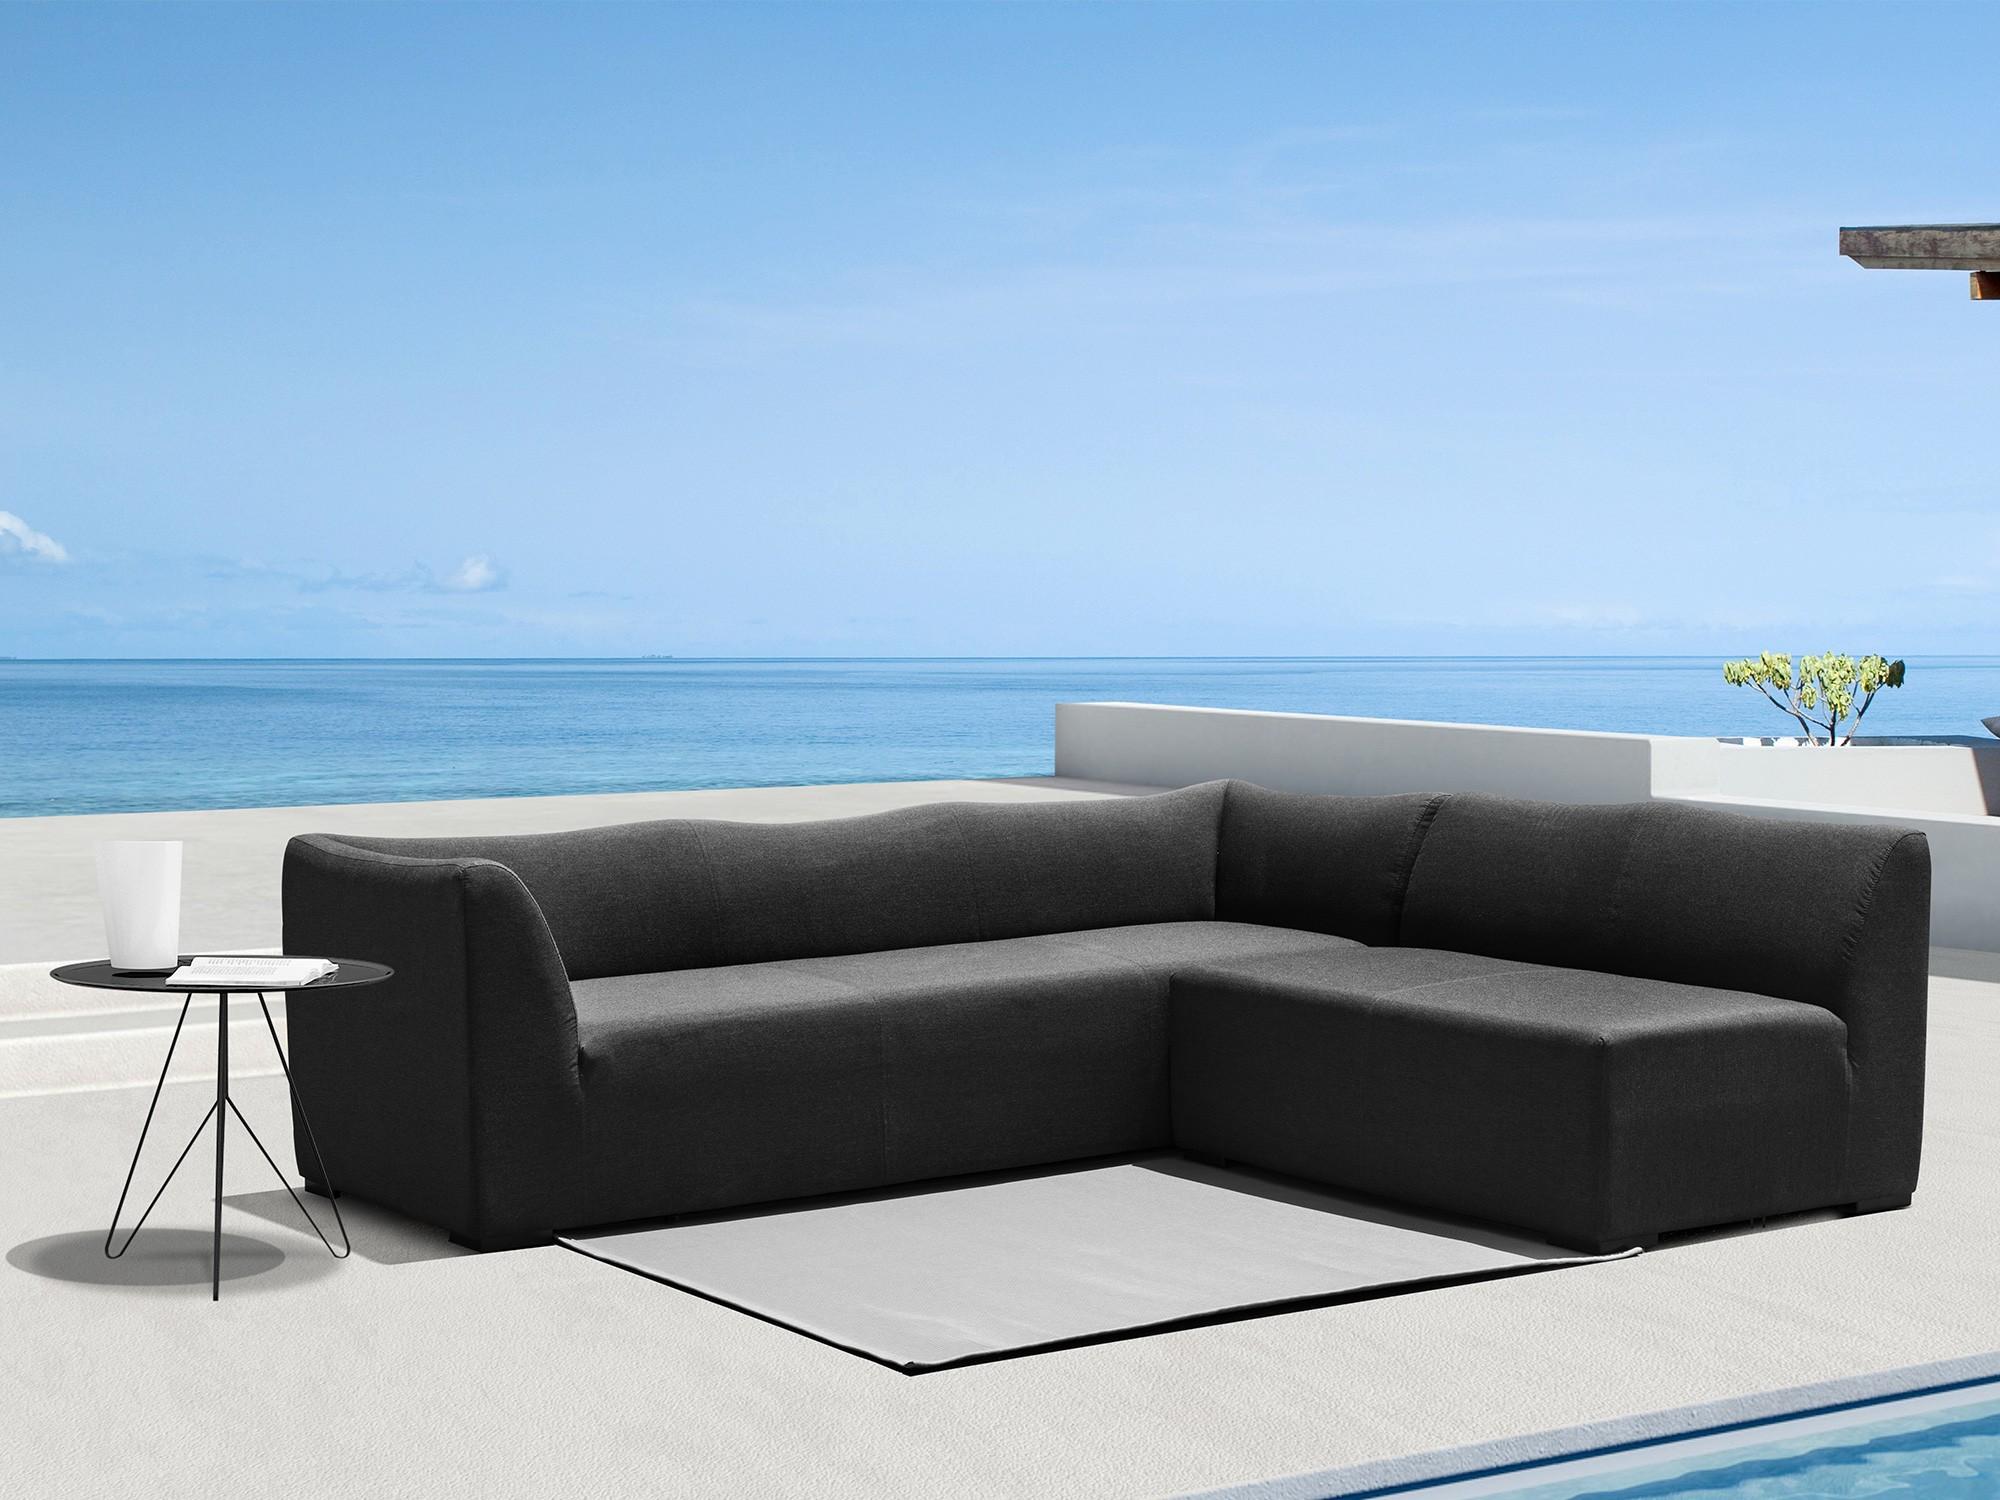 Contemporary Outdoor Sofa and Loveseat Harmony SO1575 LS1575 -Set-2 in Charcoal Fabric